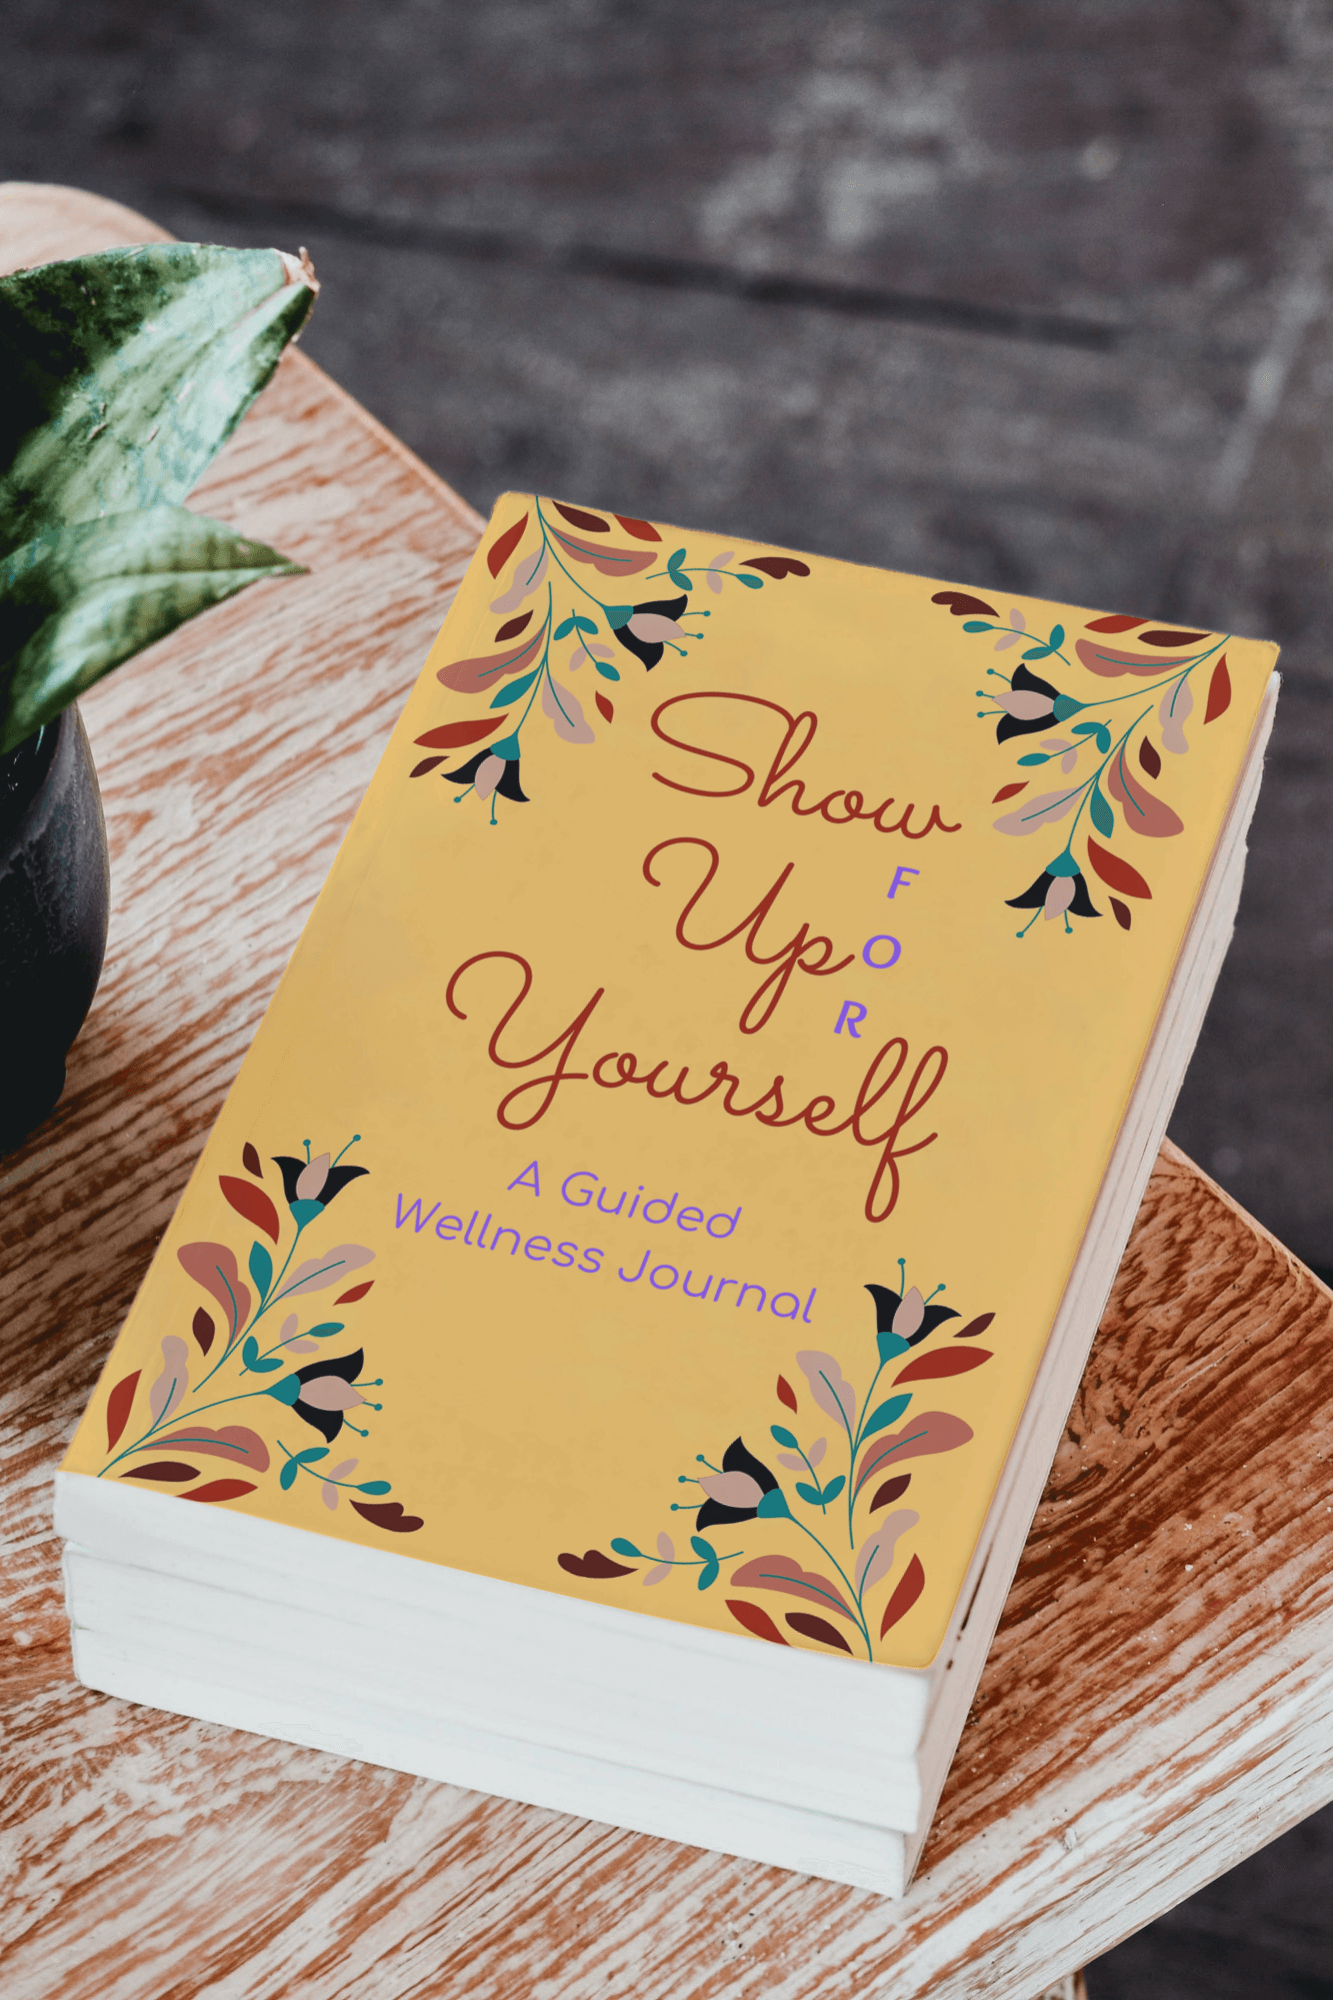 The Show Up FOR Yourself Guided Journal is an excellent wellness gift for self-improvement.